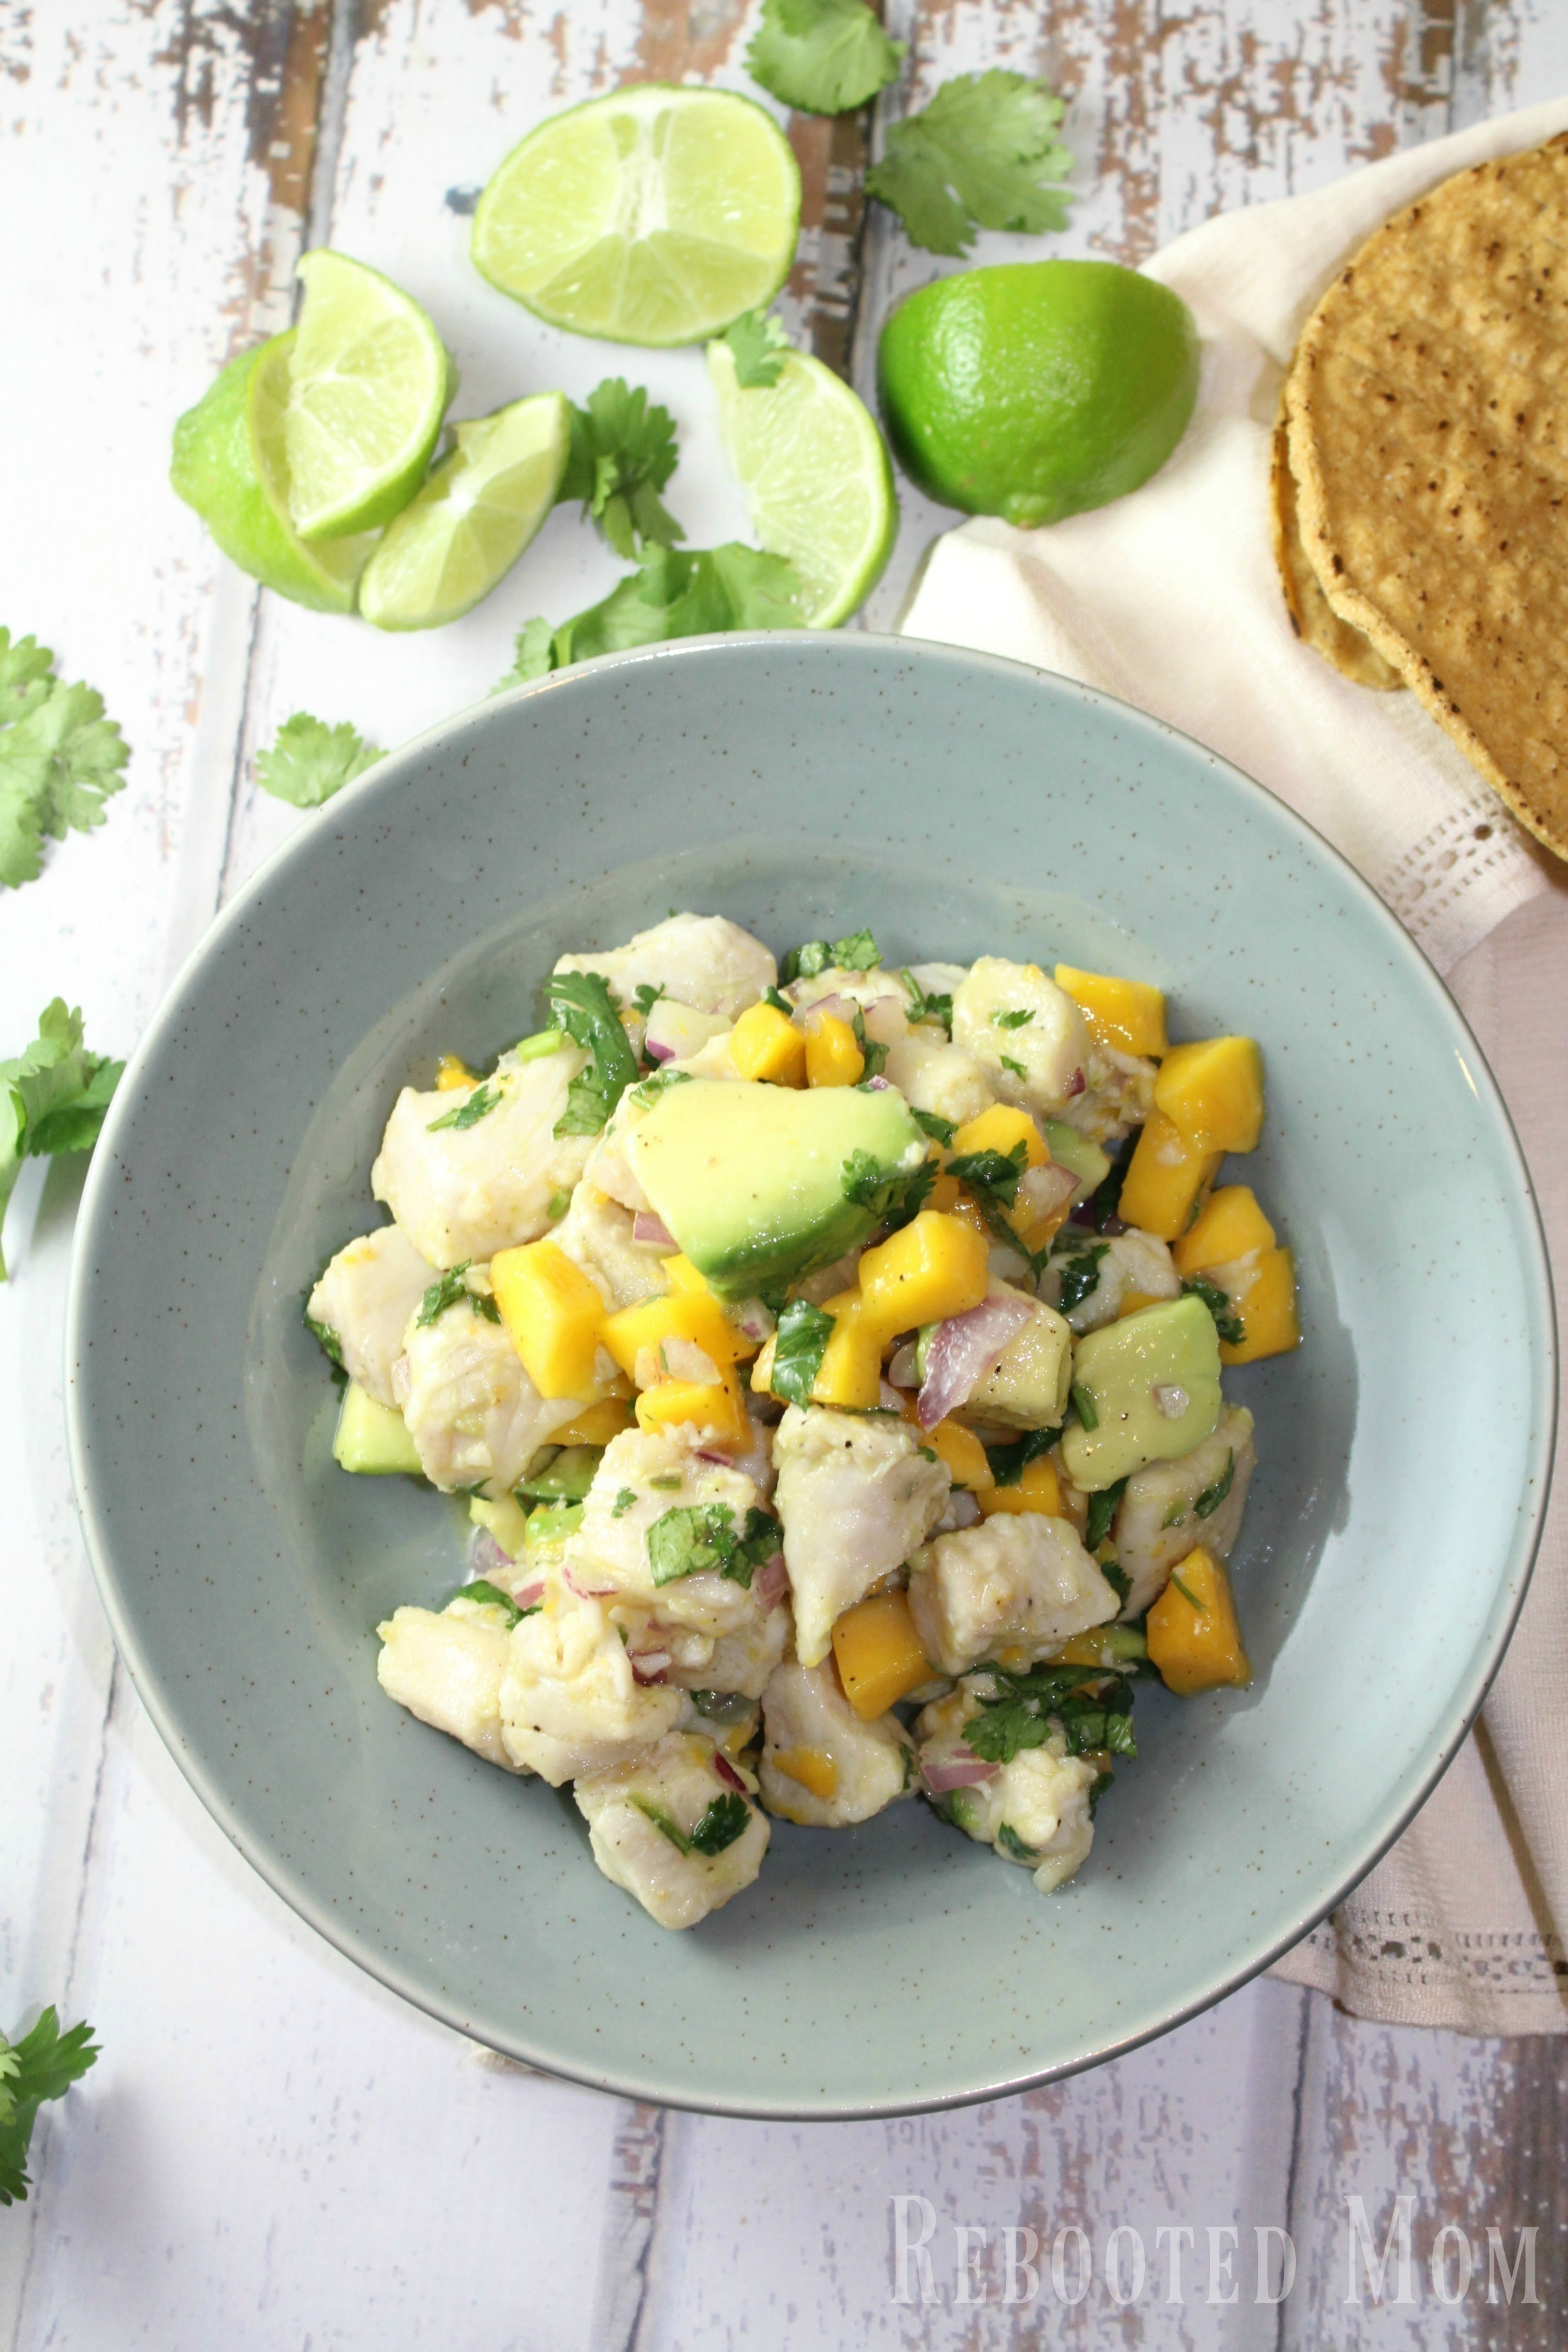 This tropical mango ceviche is a mixture of mango, avocado, onion and mahi mahi bathed in a mixture of orange juice with a punch of pepper. Best eaten with tostadas or tortilla chips.